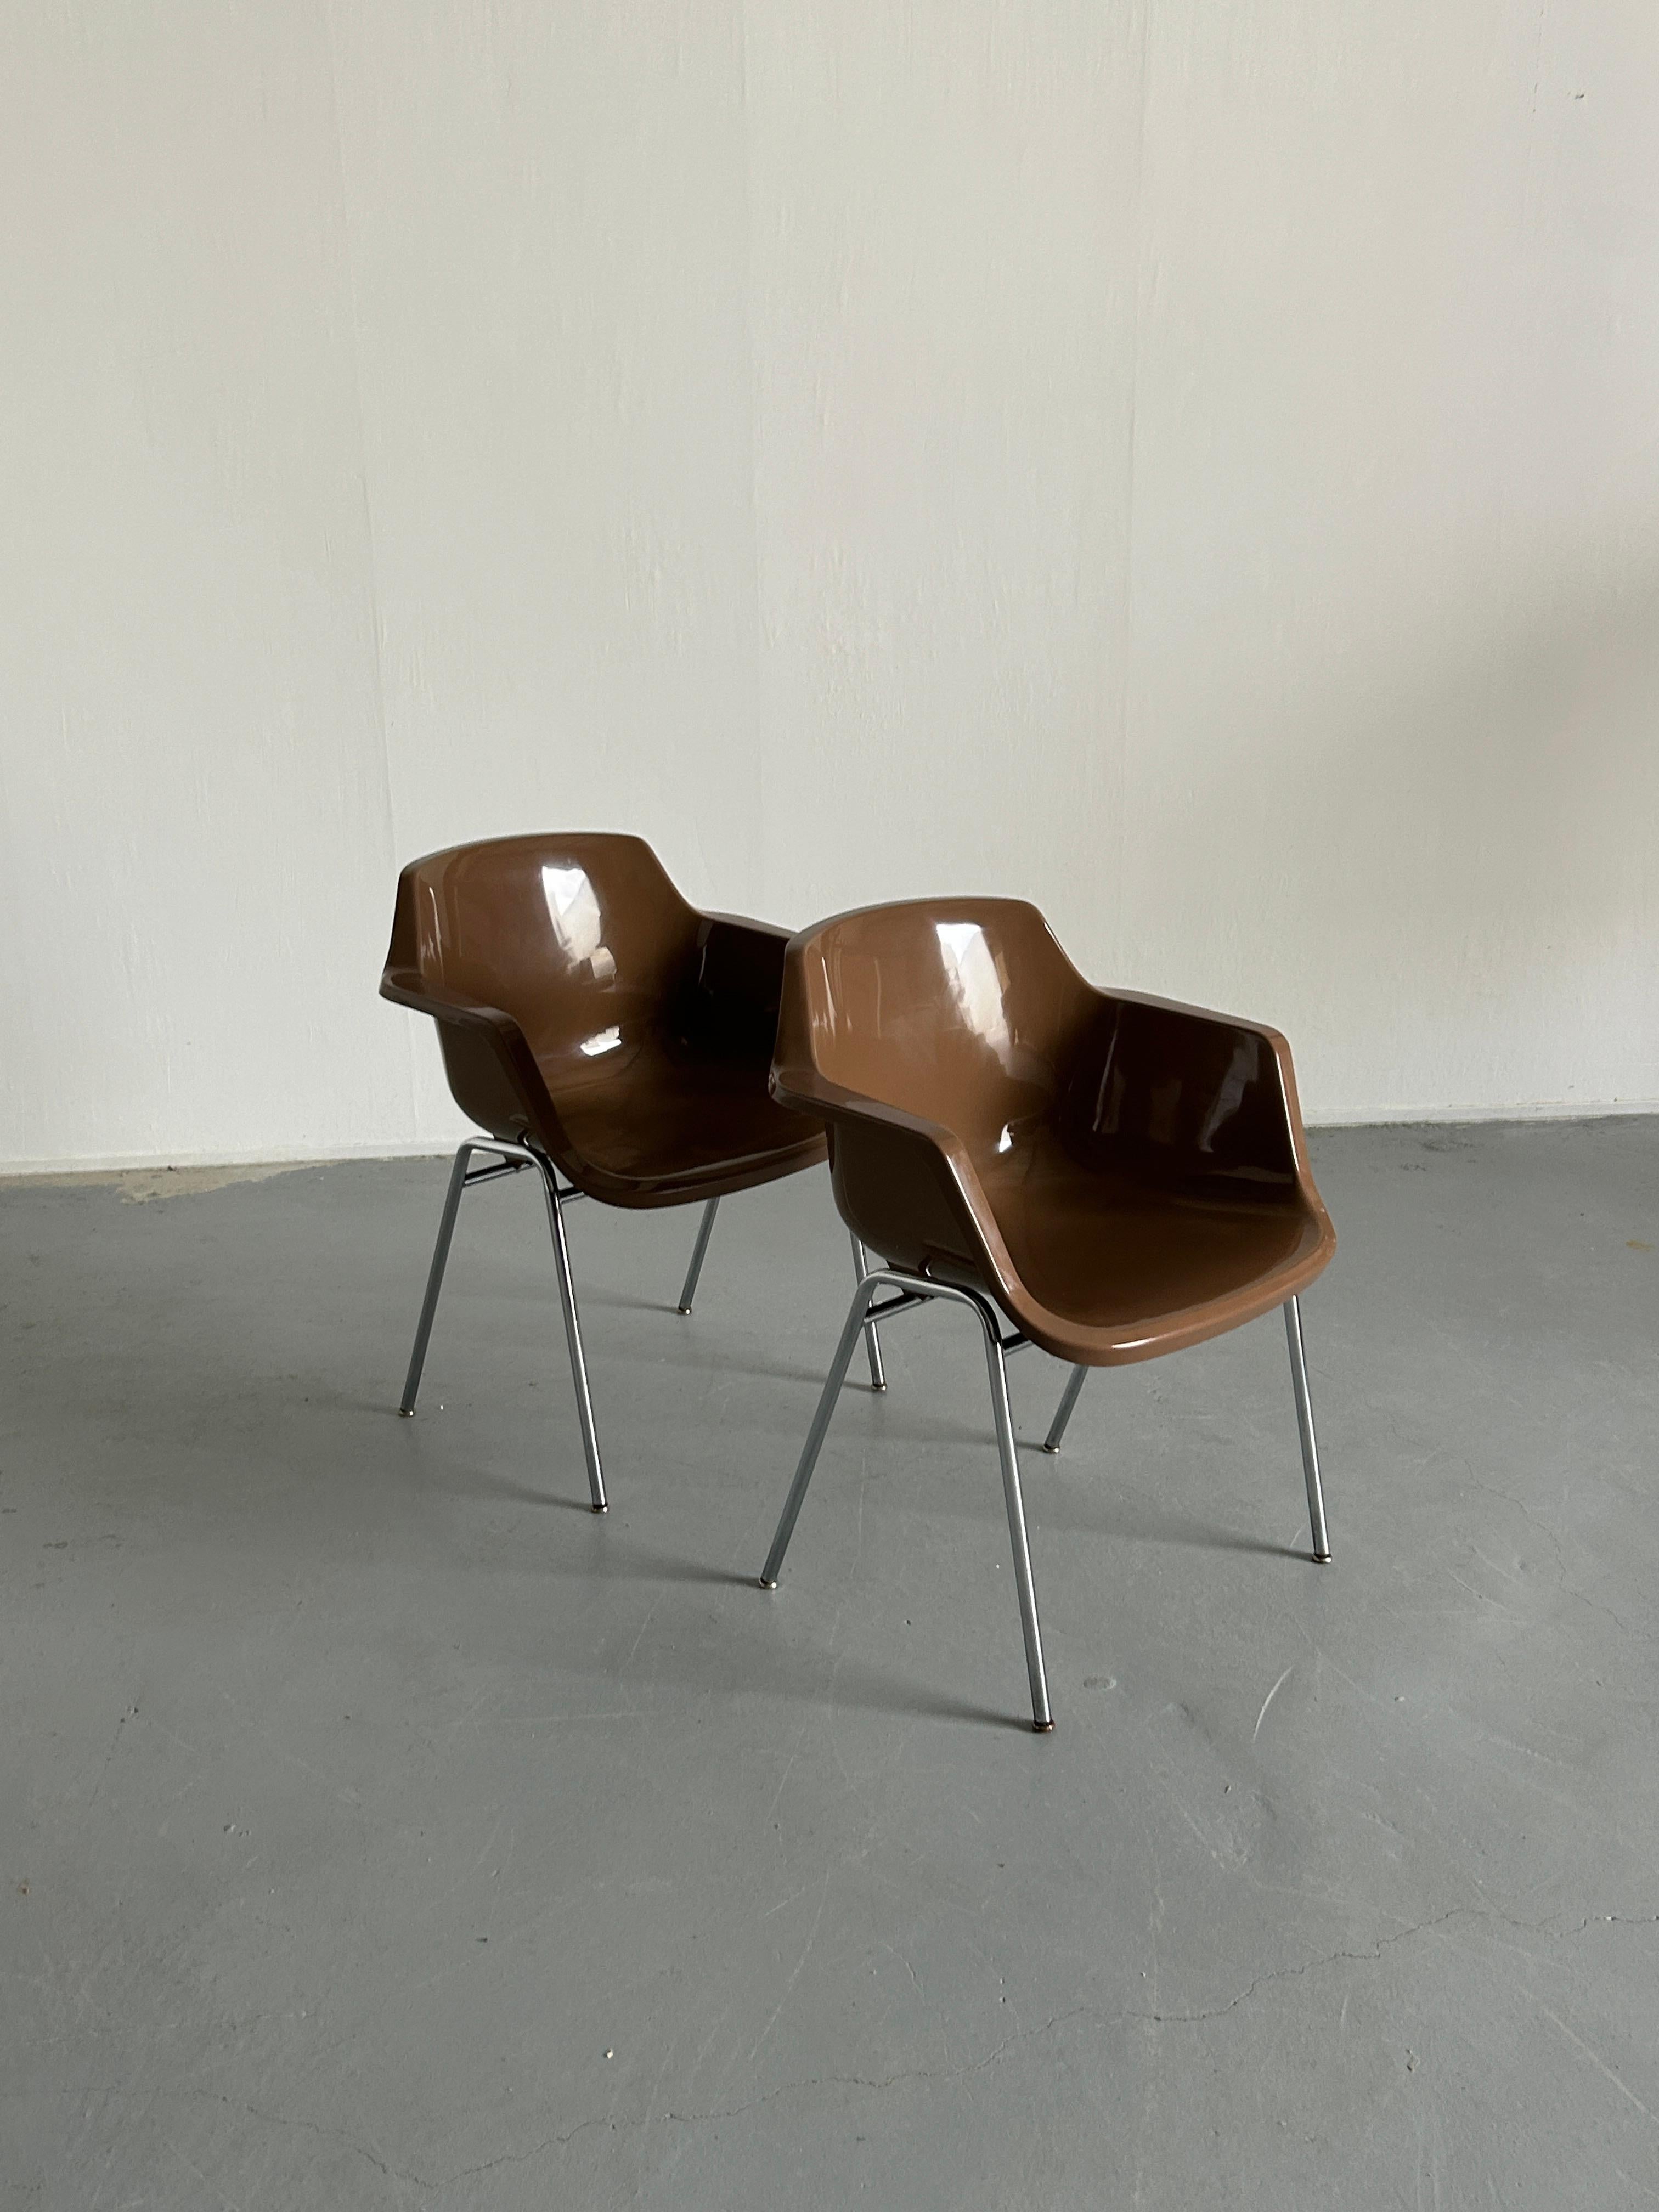 Steel 1 of 4 Vintage Mid-Century Shell Plastic Dining Chairs in style of Eames Shell  For Sale